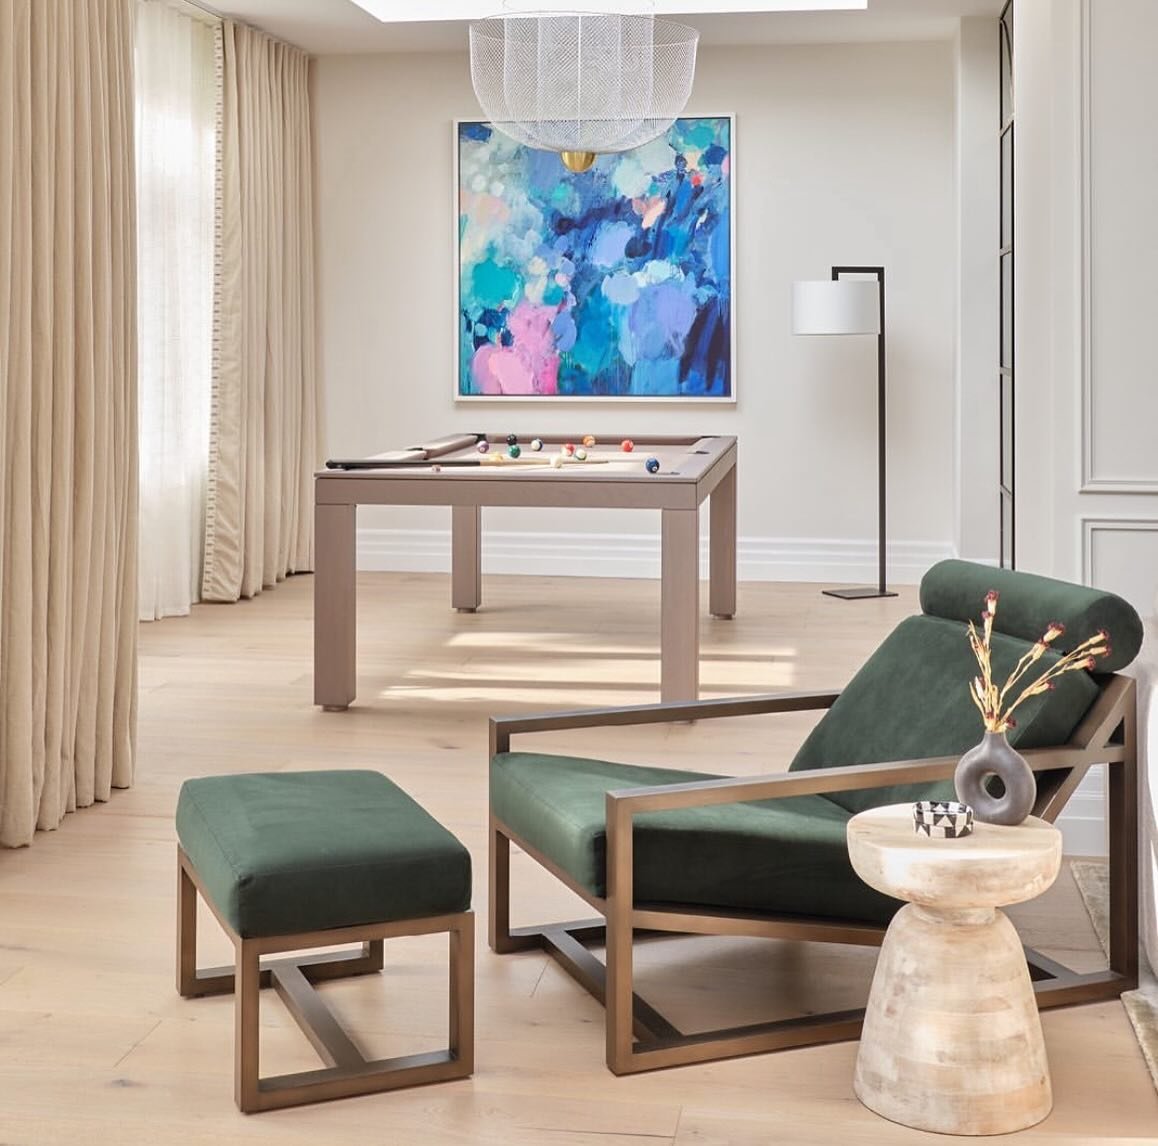 Sea Diving in a Stunning home in West London designed by @qdesignhouse ! 
&bull;
Its a joyful feeling to see my paintings in their homes and I love the idea that the sea is omnipresent here in this beautiful city home! 
&bull;
This painting is also a